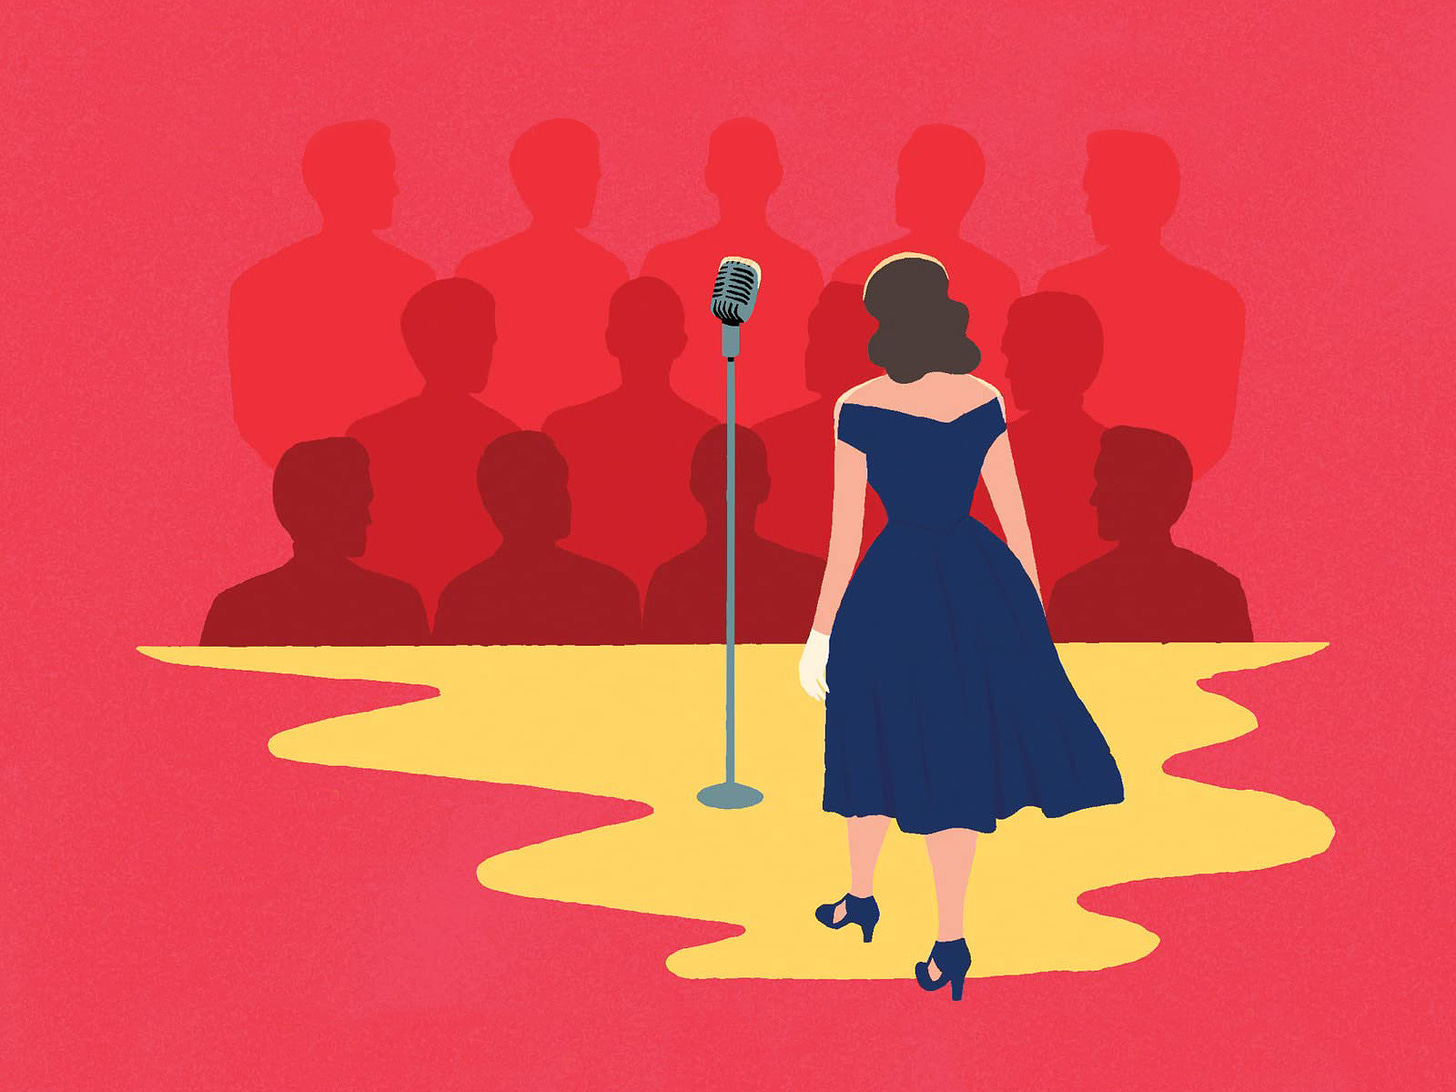 In a stylized illustration, we see a brown-haired woman in a blue dress from behind as she approaches a spotlit old-fashioned microphone before an audience of dim silhouetted men.